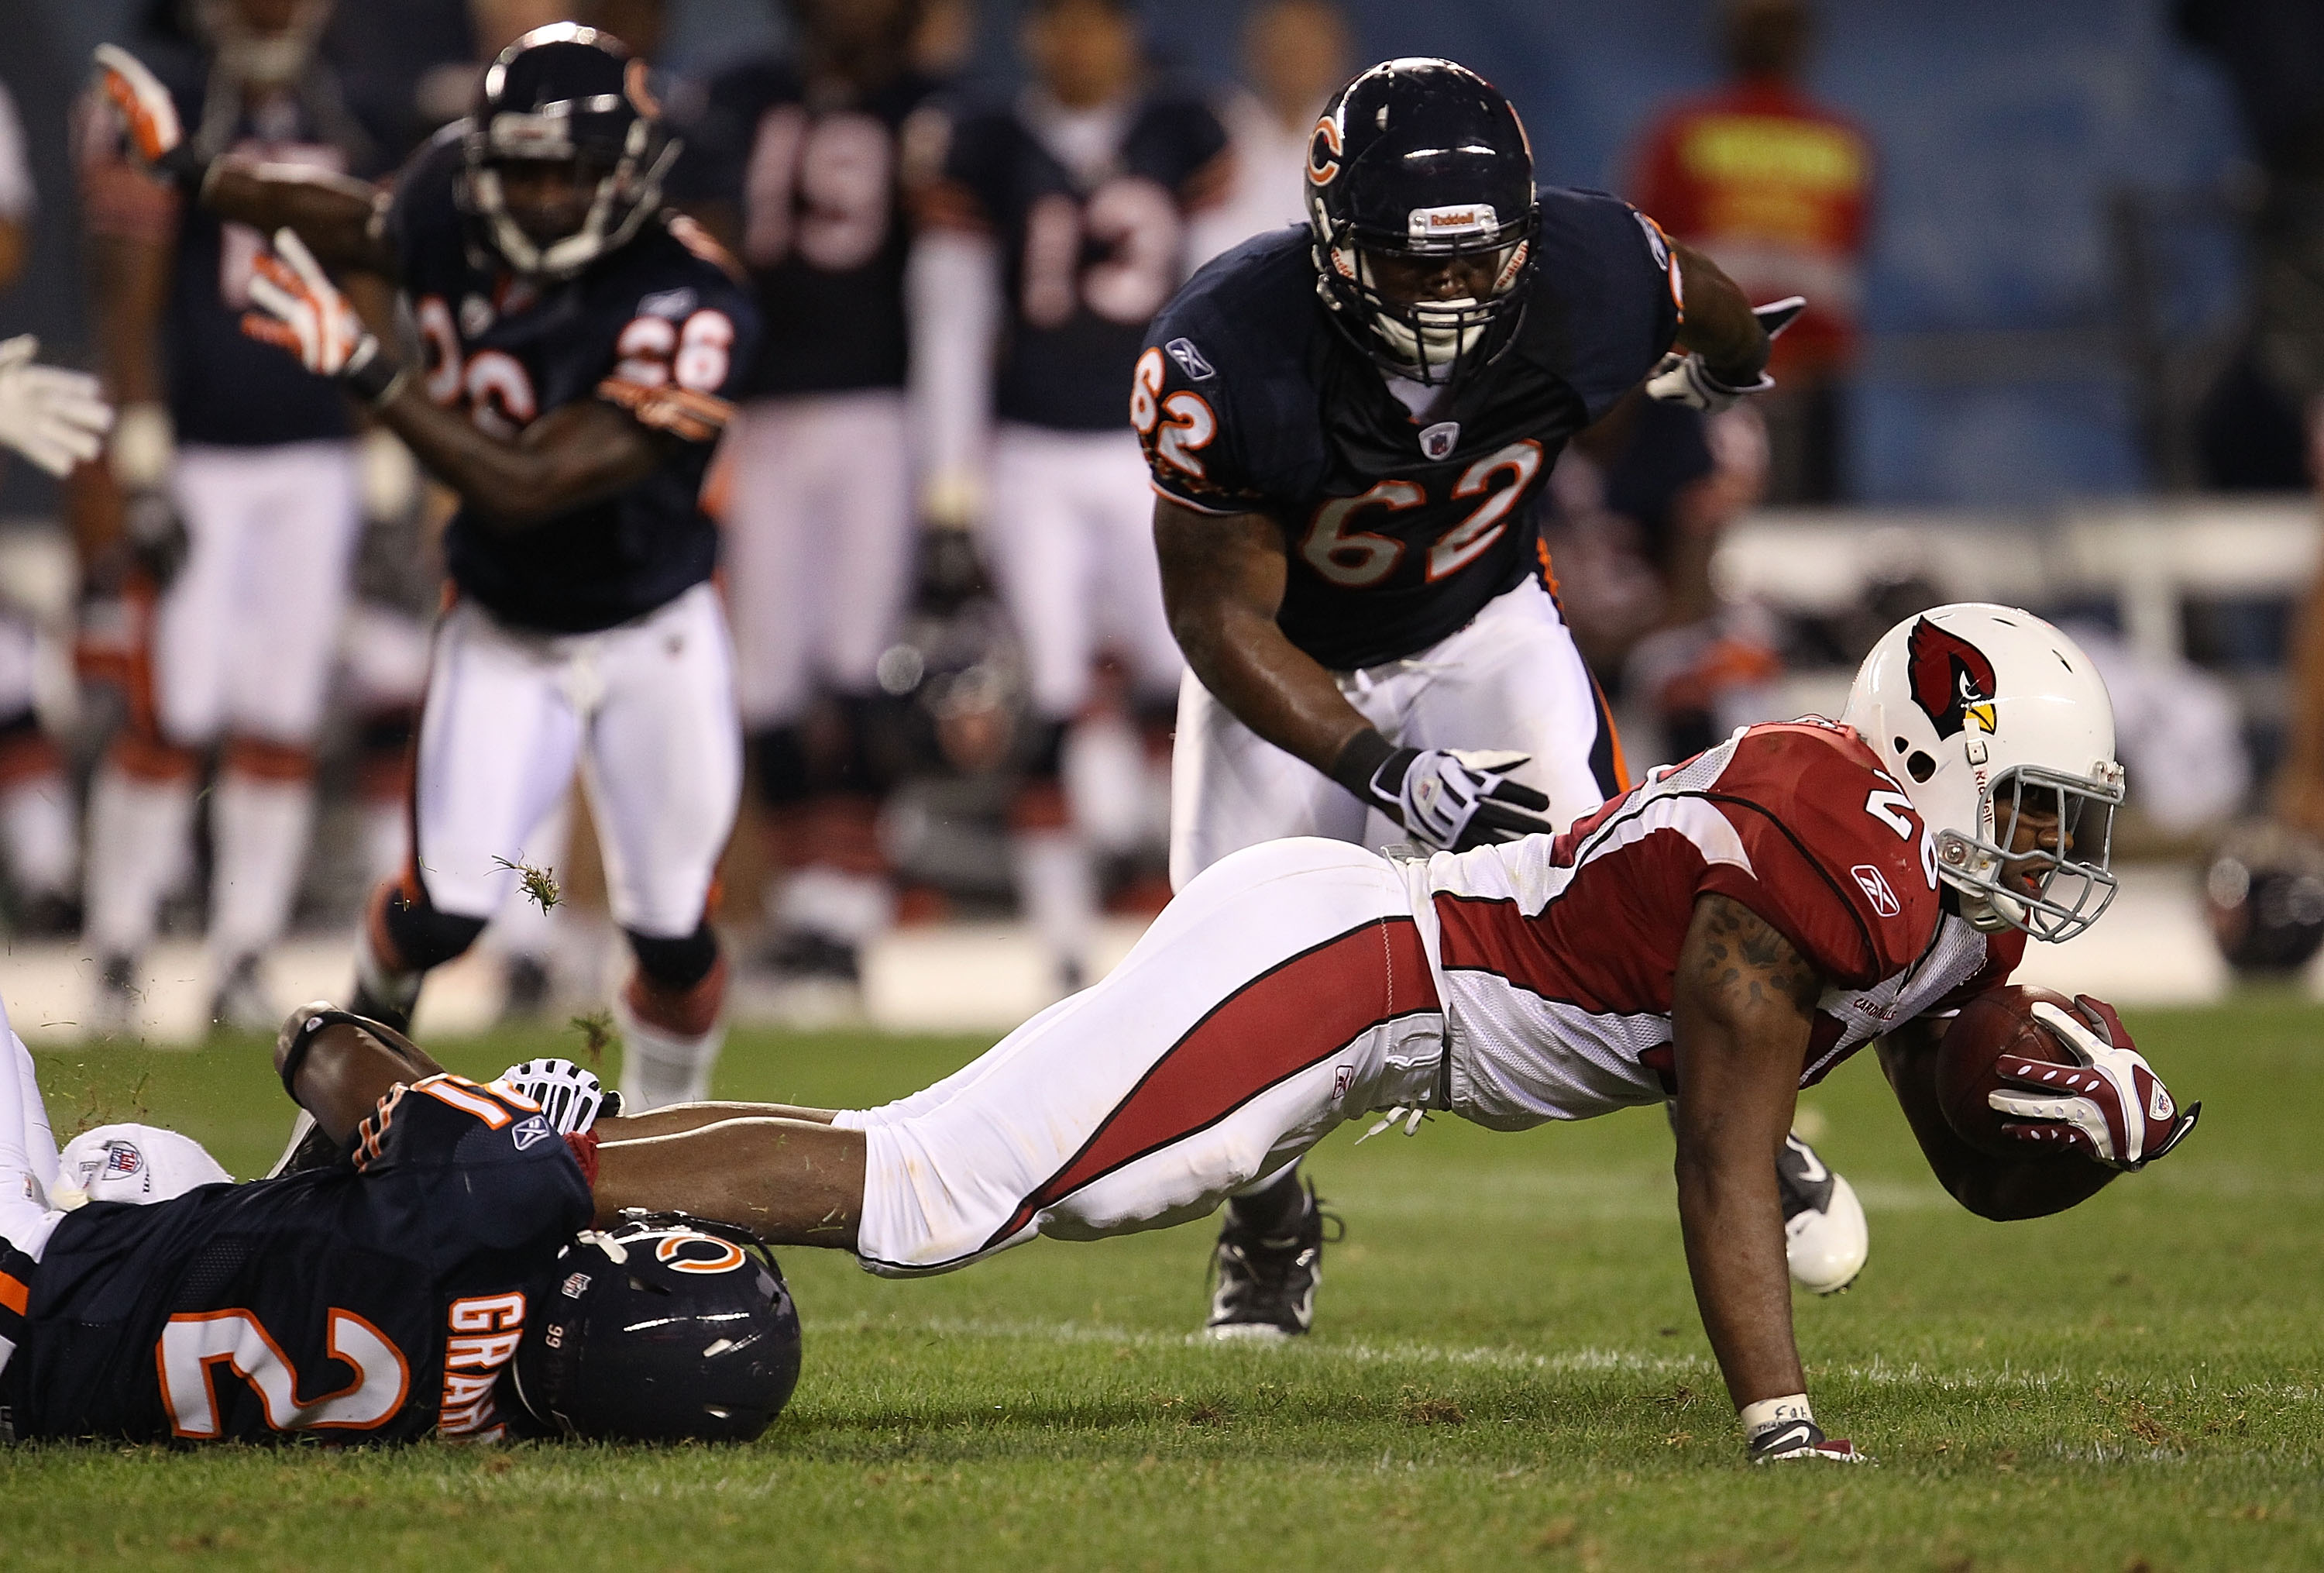 CHICAGO - AUGUST 28: Corey Graham #21 of the Chicago Bears drops Beanie Wells #26 of the Arizona Cardinals during a preseason game at Soldier Field on August 28, 2010 in Chicago, Illinois. The Cardinals defeated the Bears 14-9. (Photo by Jonathan Daniel/G